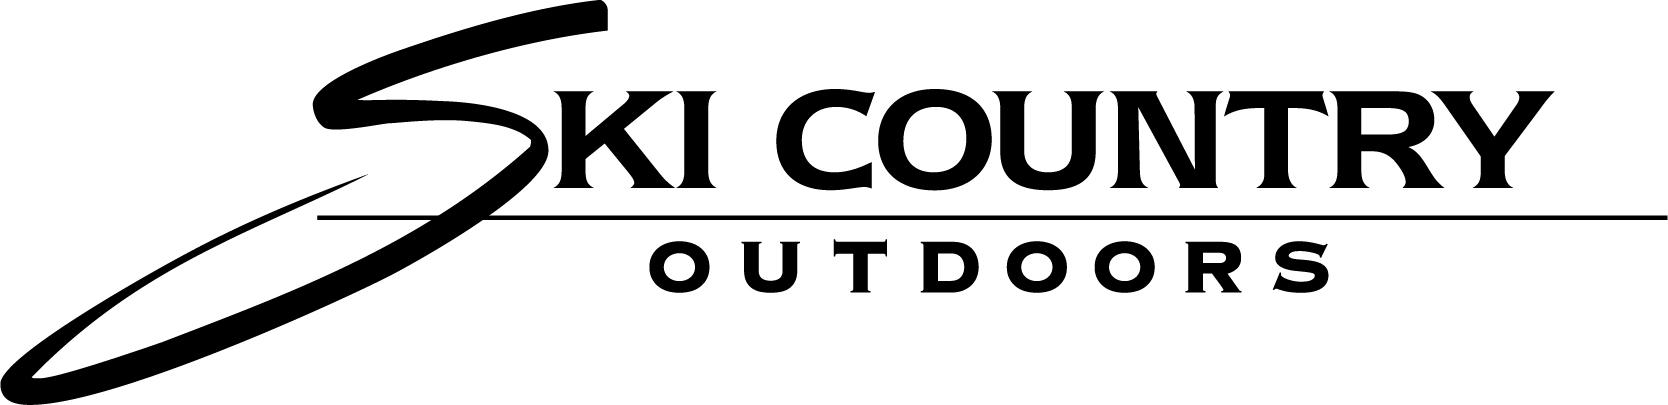 Ski Country Outdoors